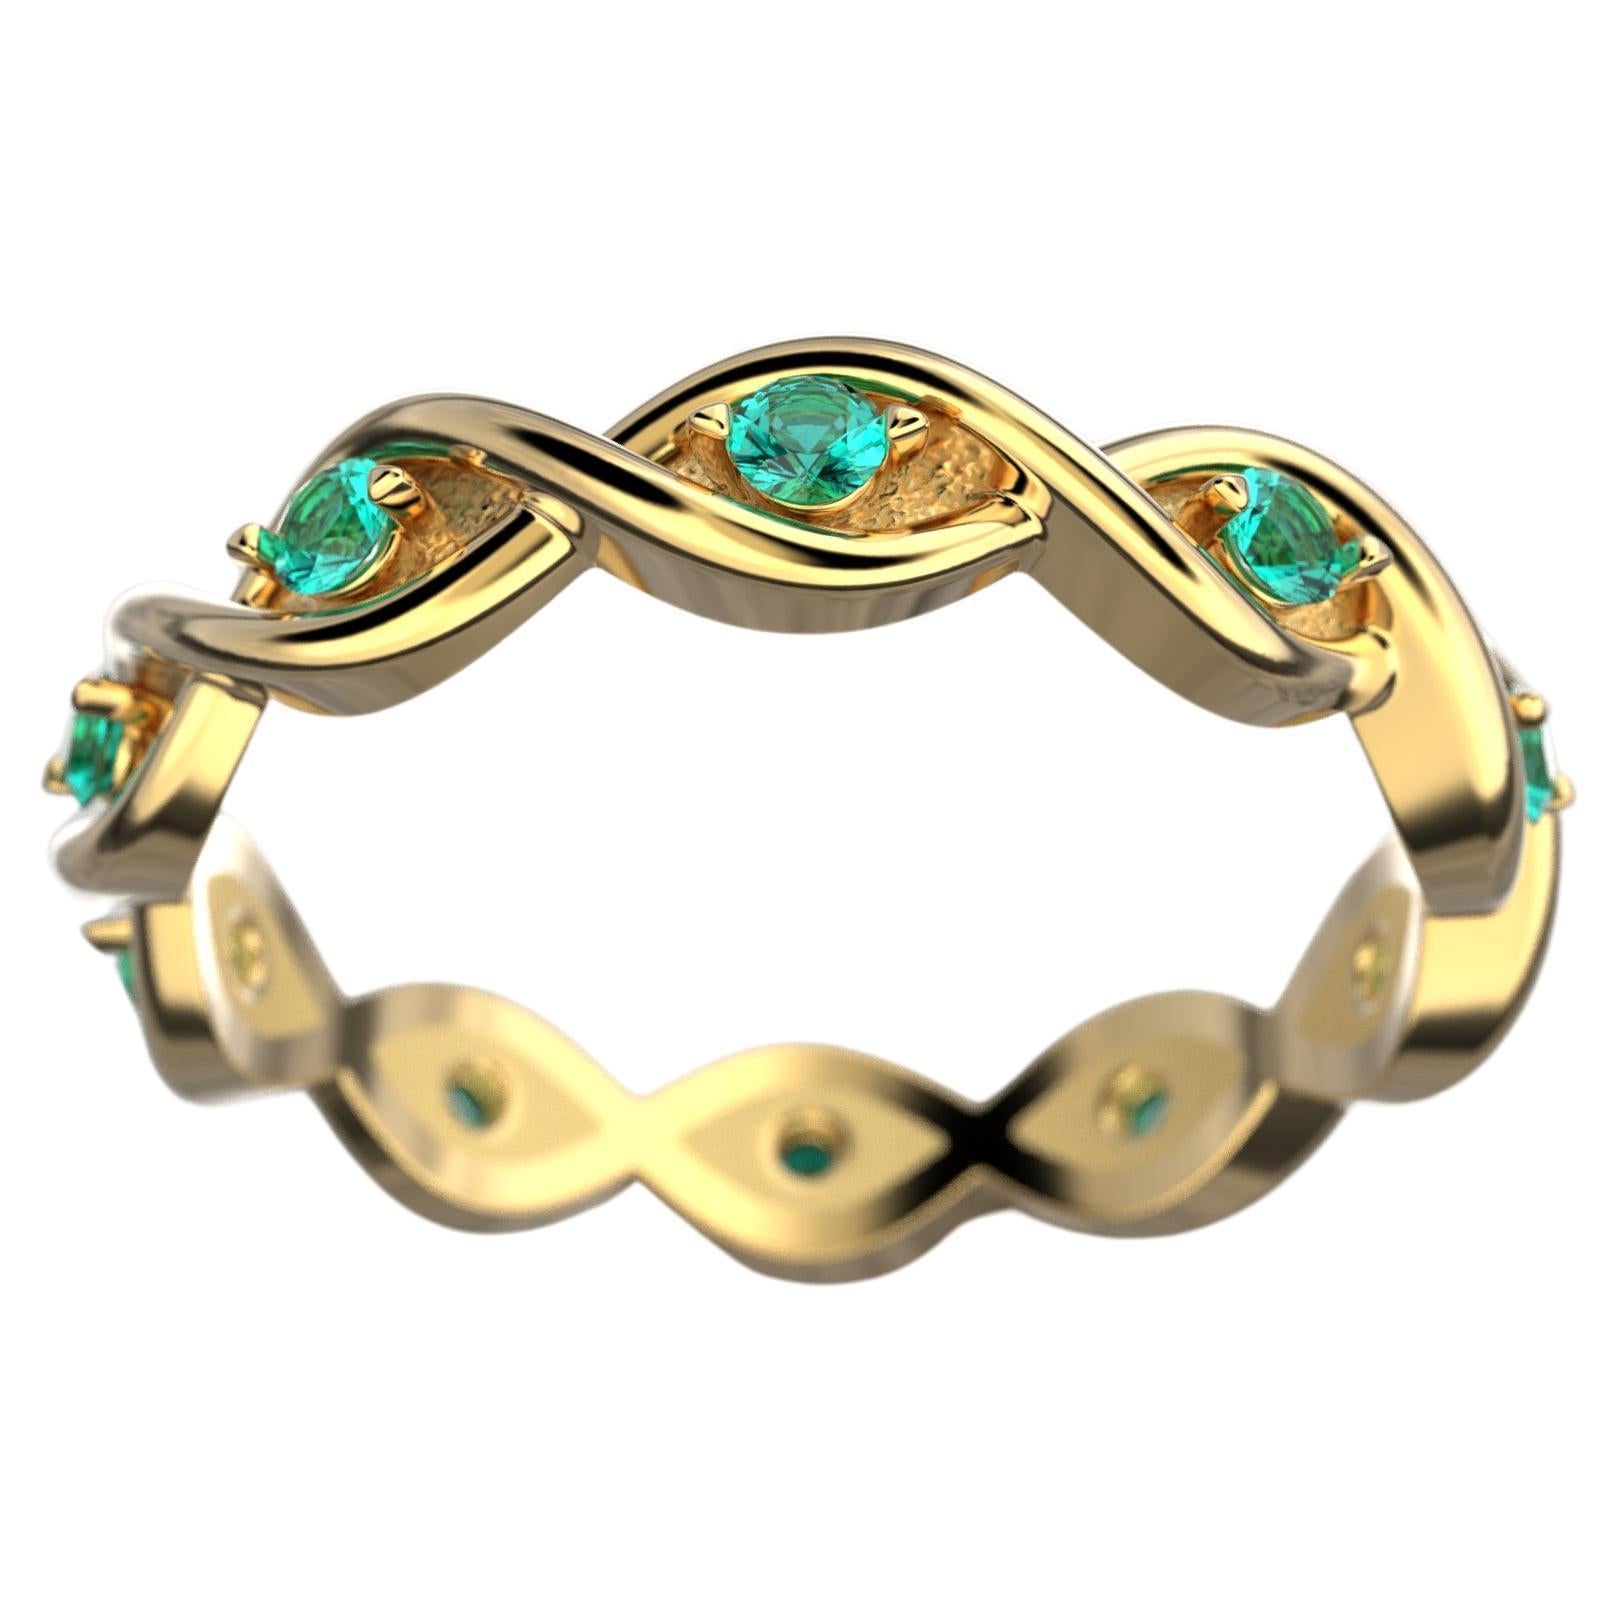 Oltremare Gioielli Emerald Gold Eternity Band in 14k, Made in Italy